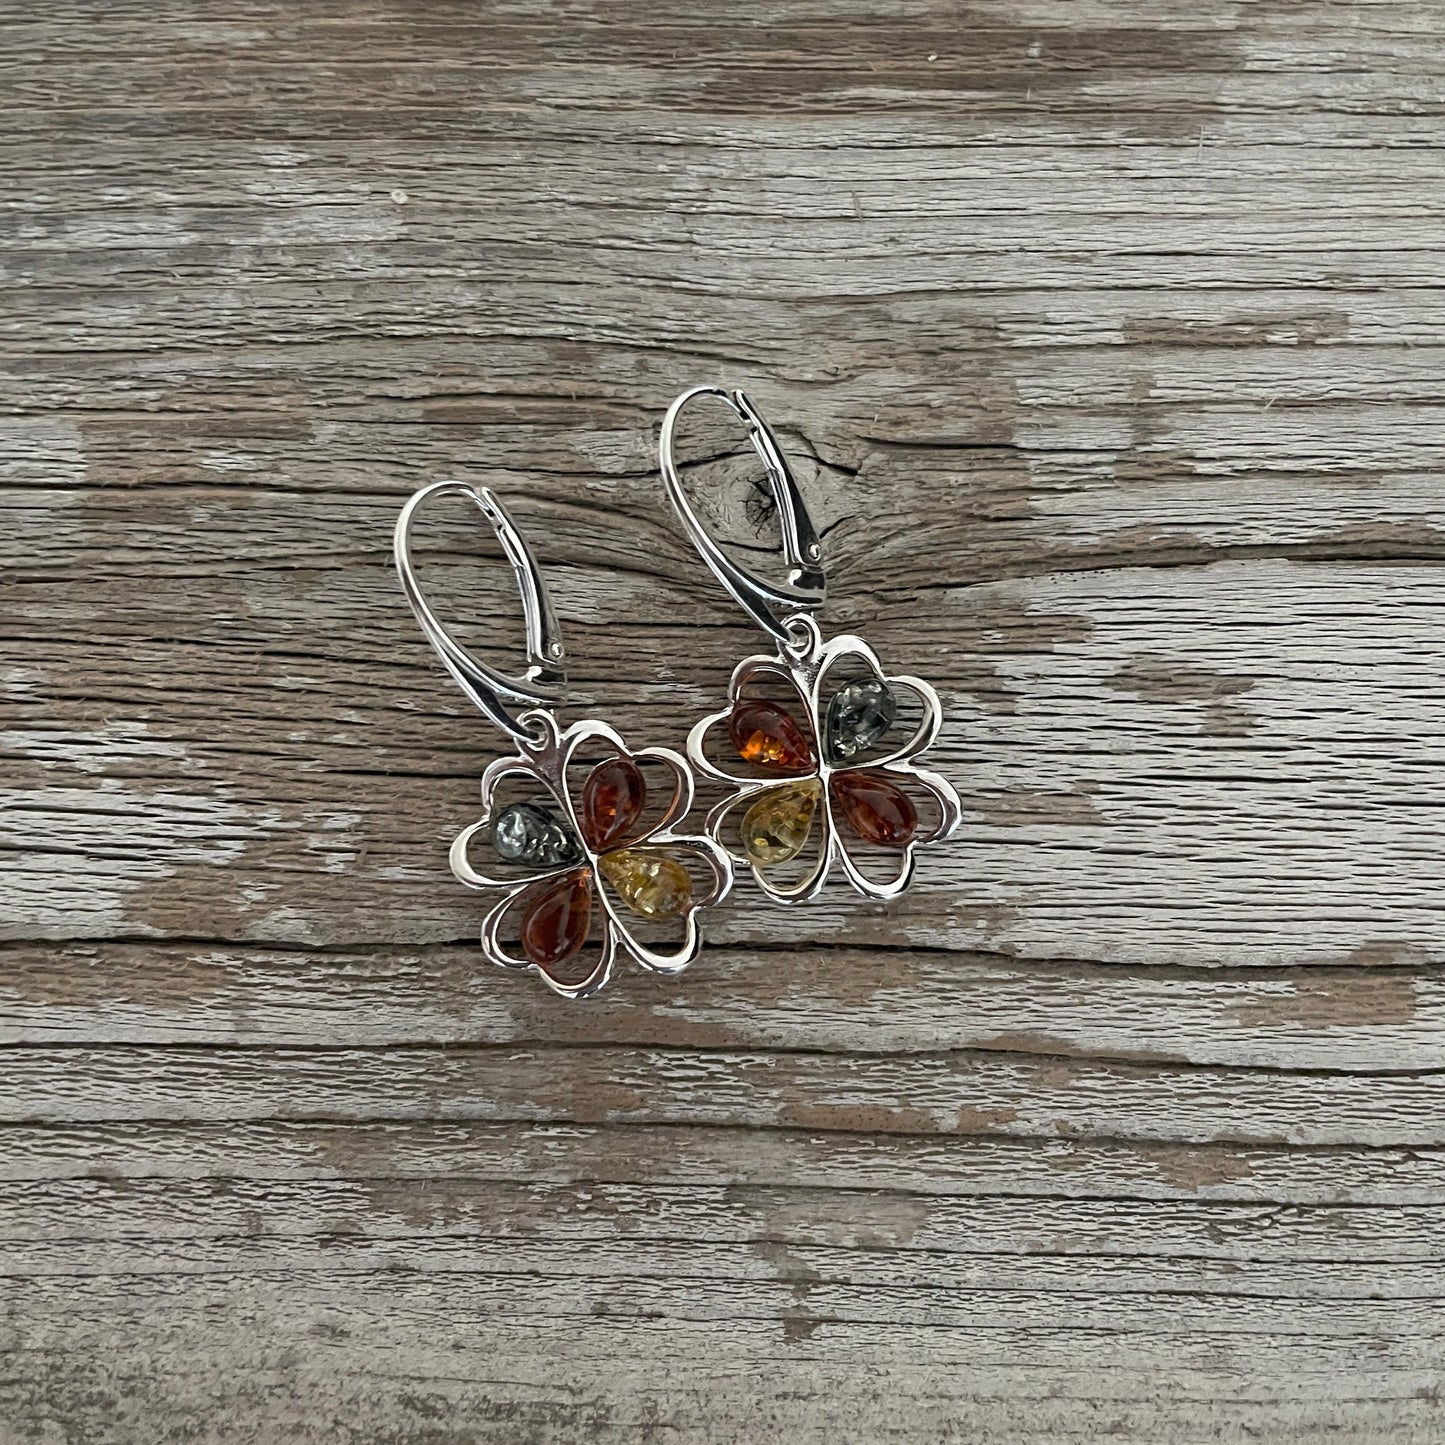 amber stones set in sterling silver shaped flowers